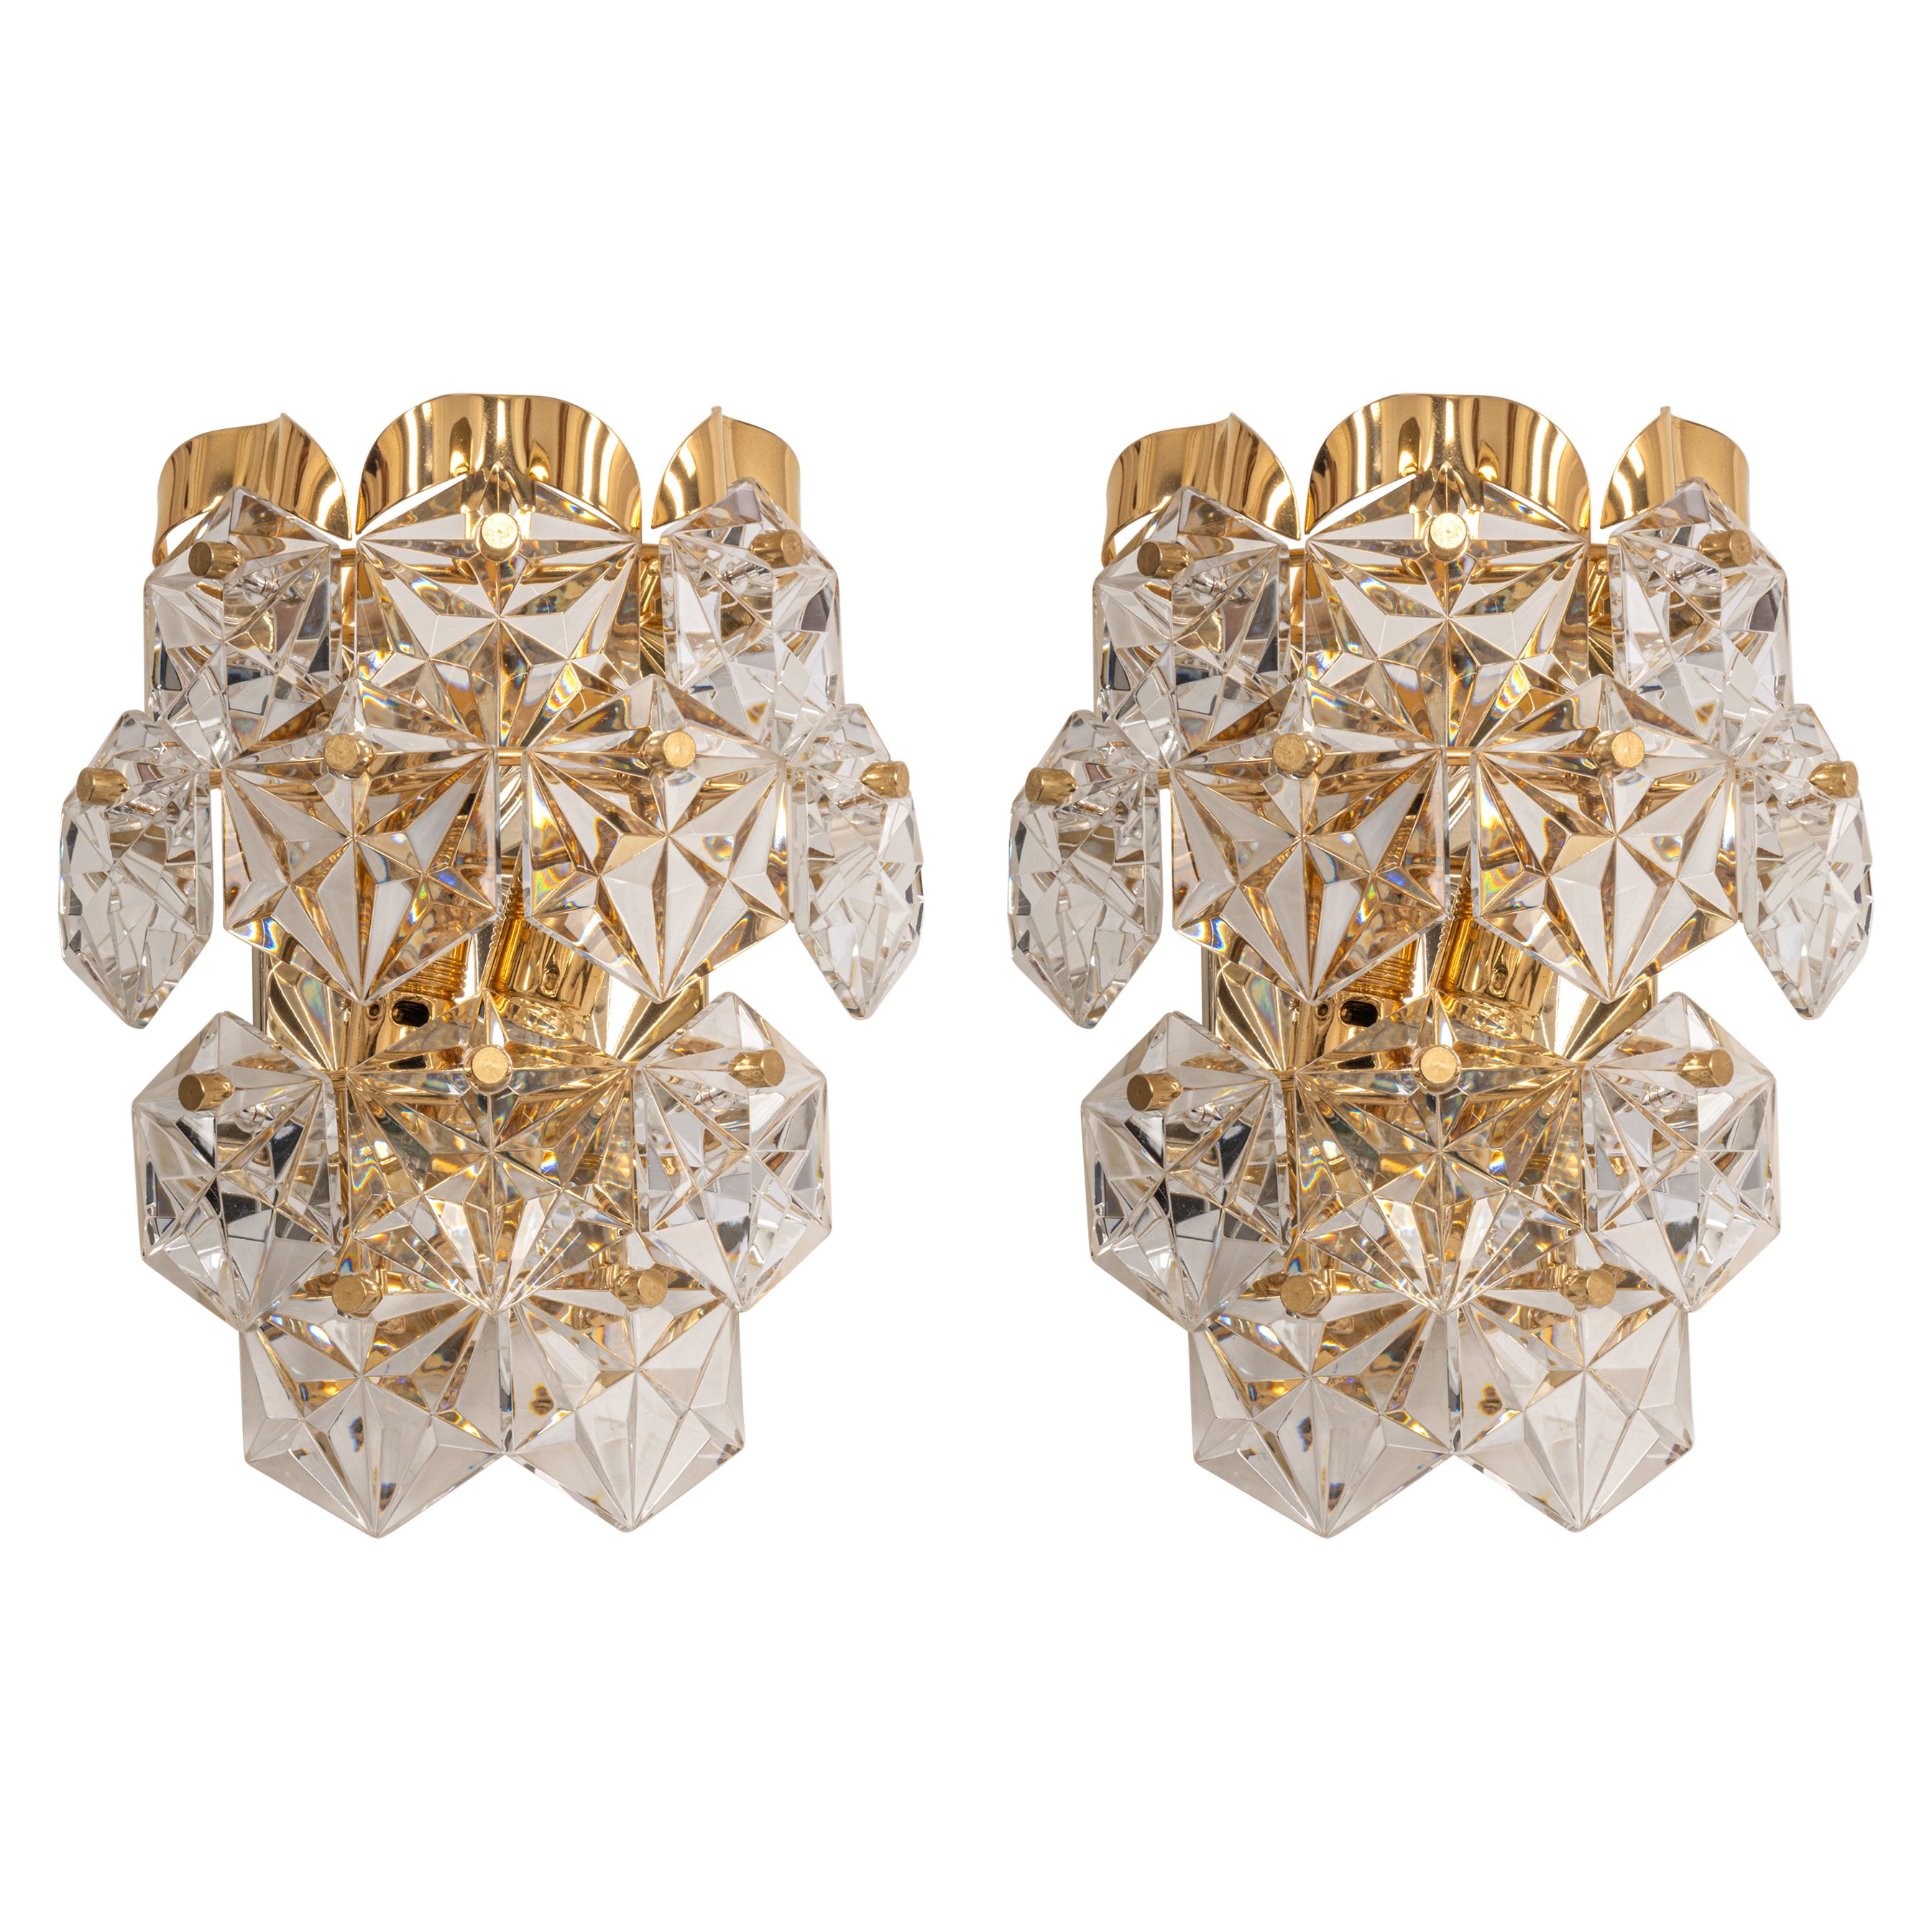 Late 20th Century 1 of 4 Stunning Pair of Crystal Sconces by Kinkeldey, Germany, 1970s For Sale